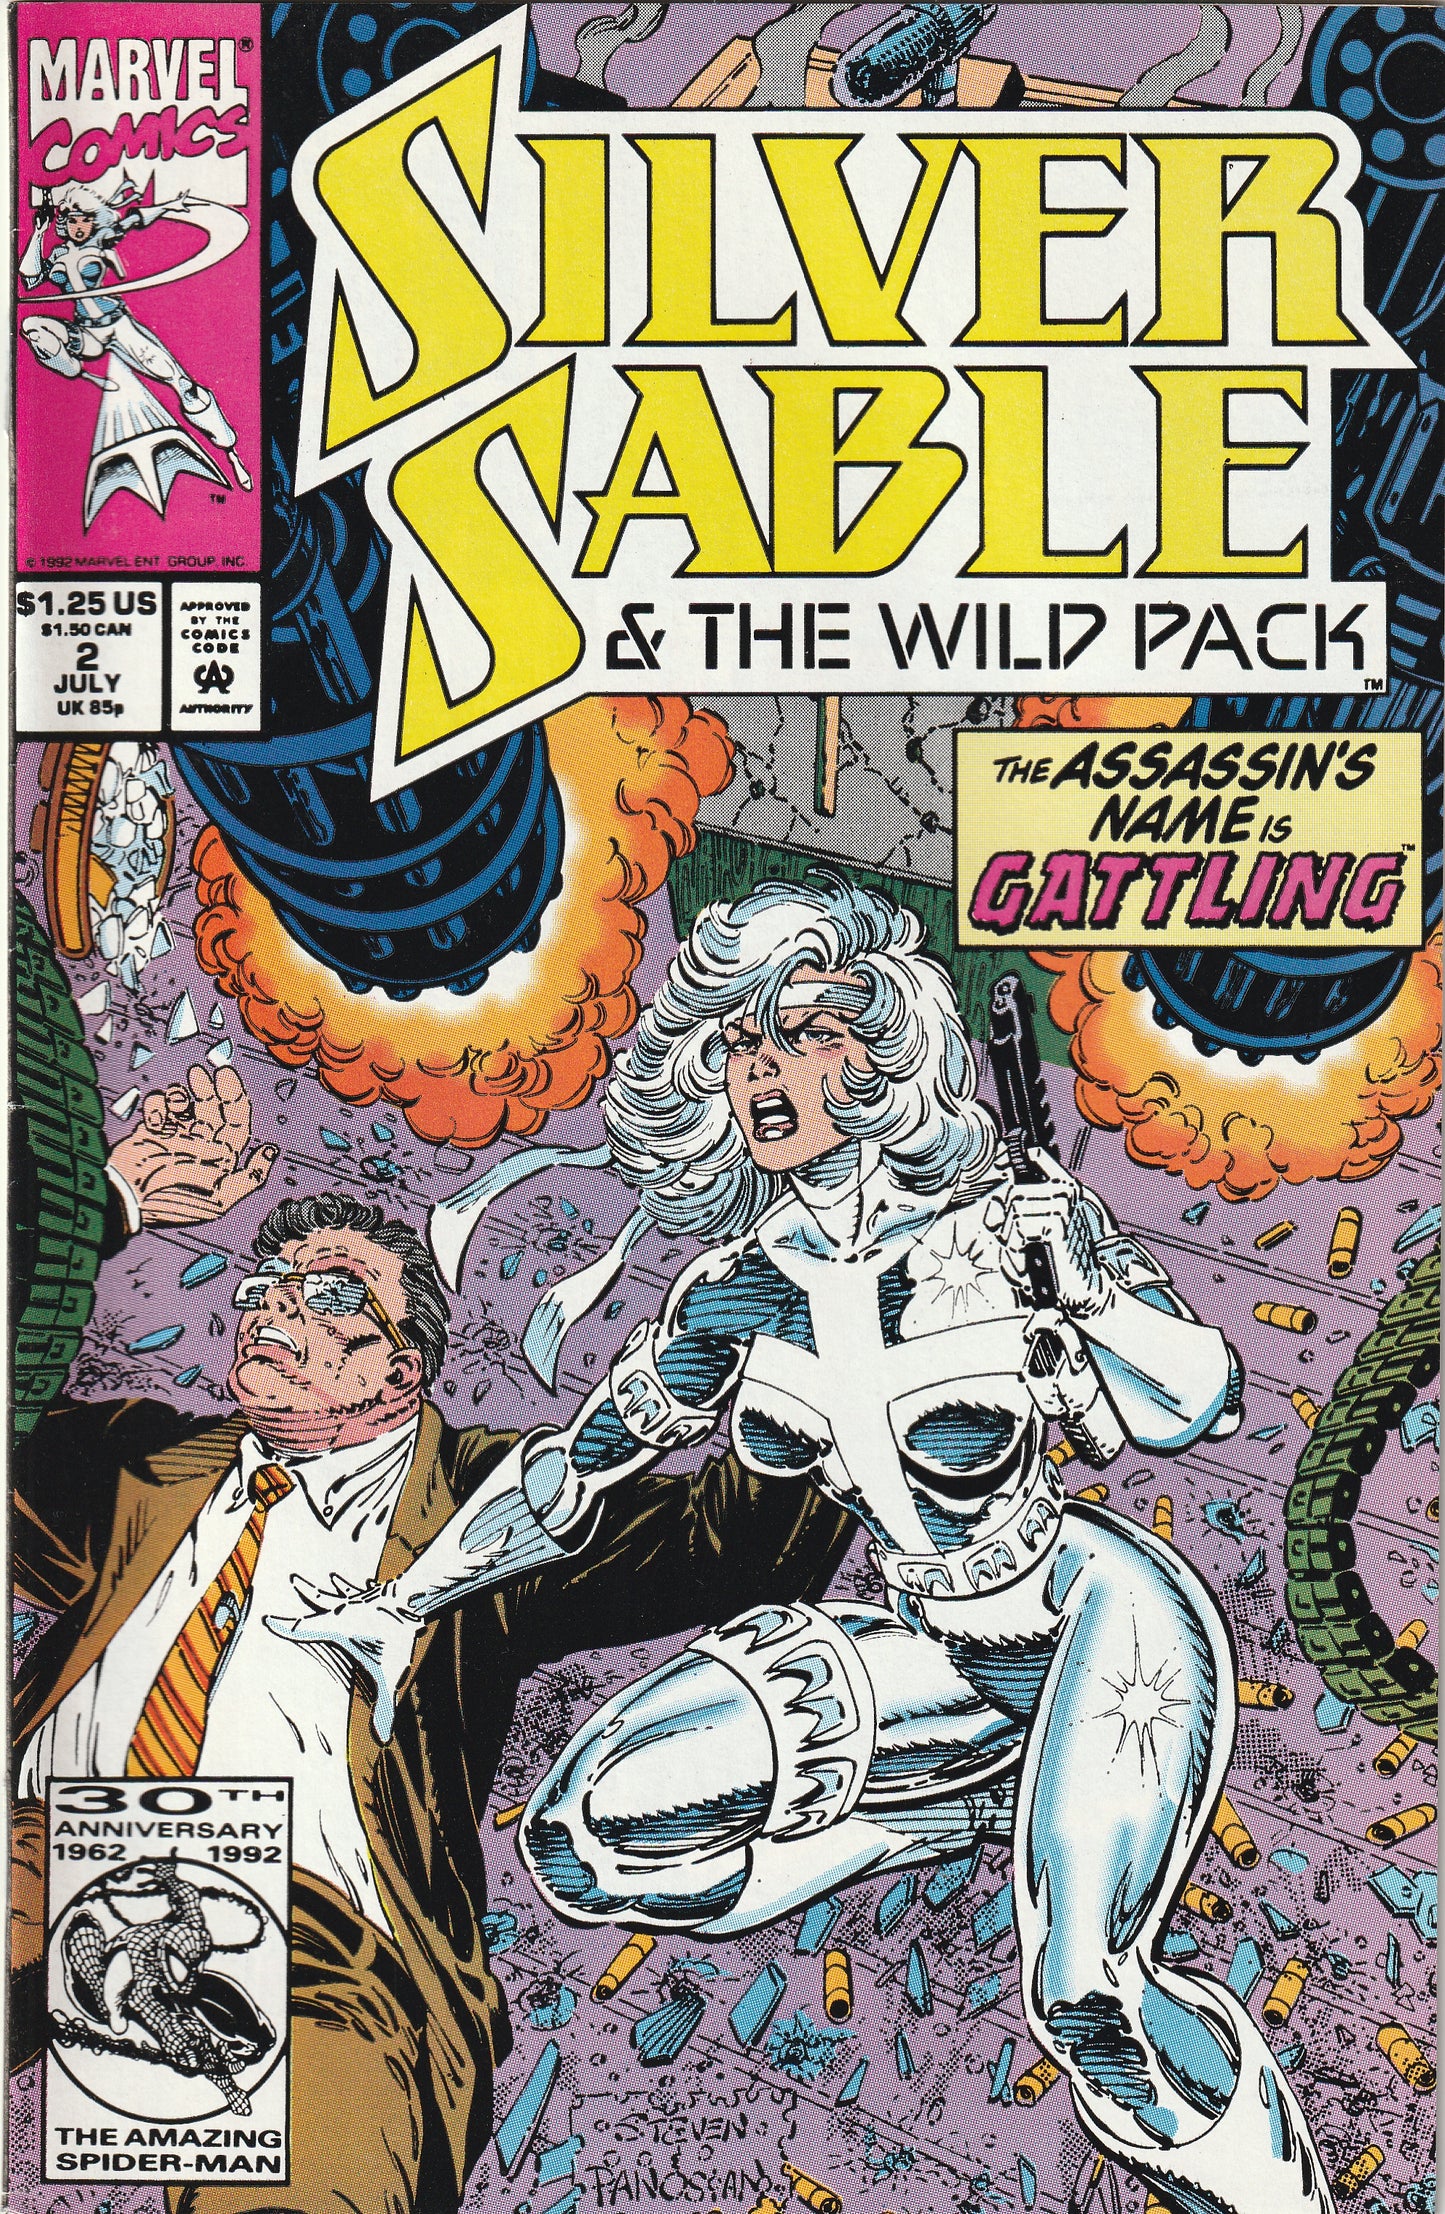 Silver Sable & The Wild Pack #2 (1992)